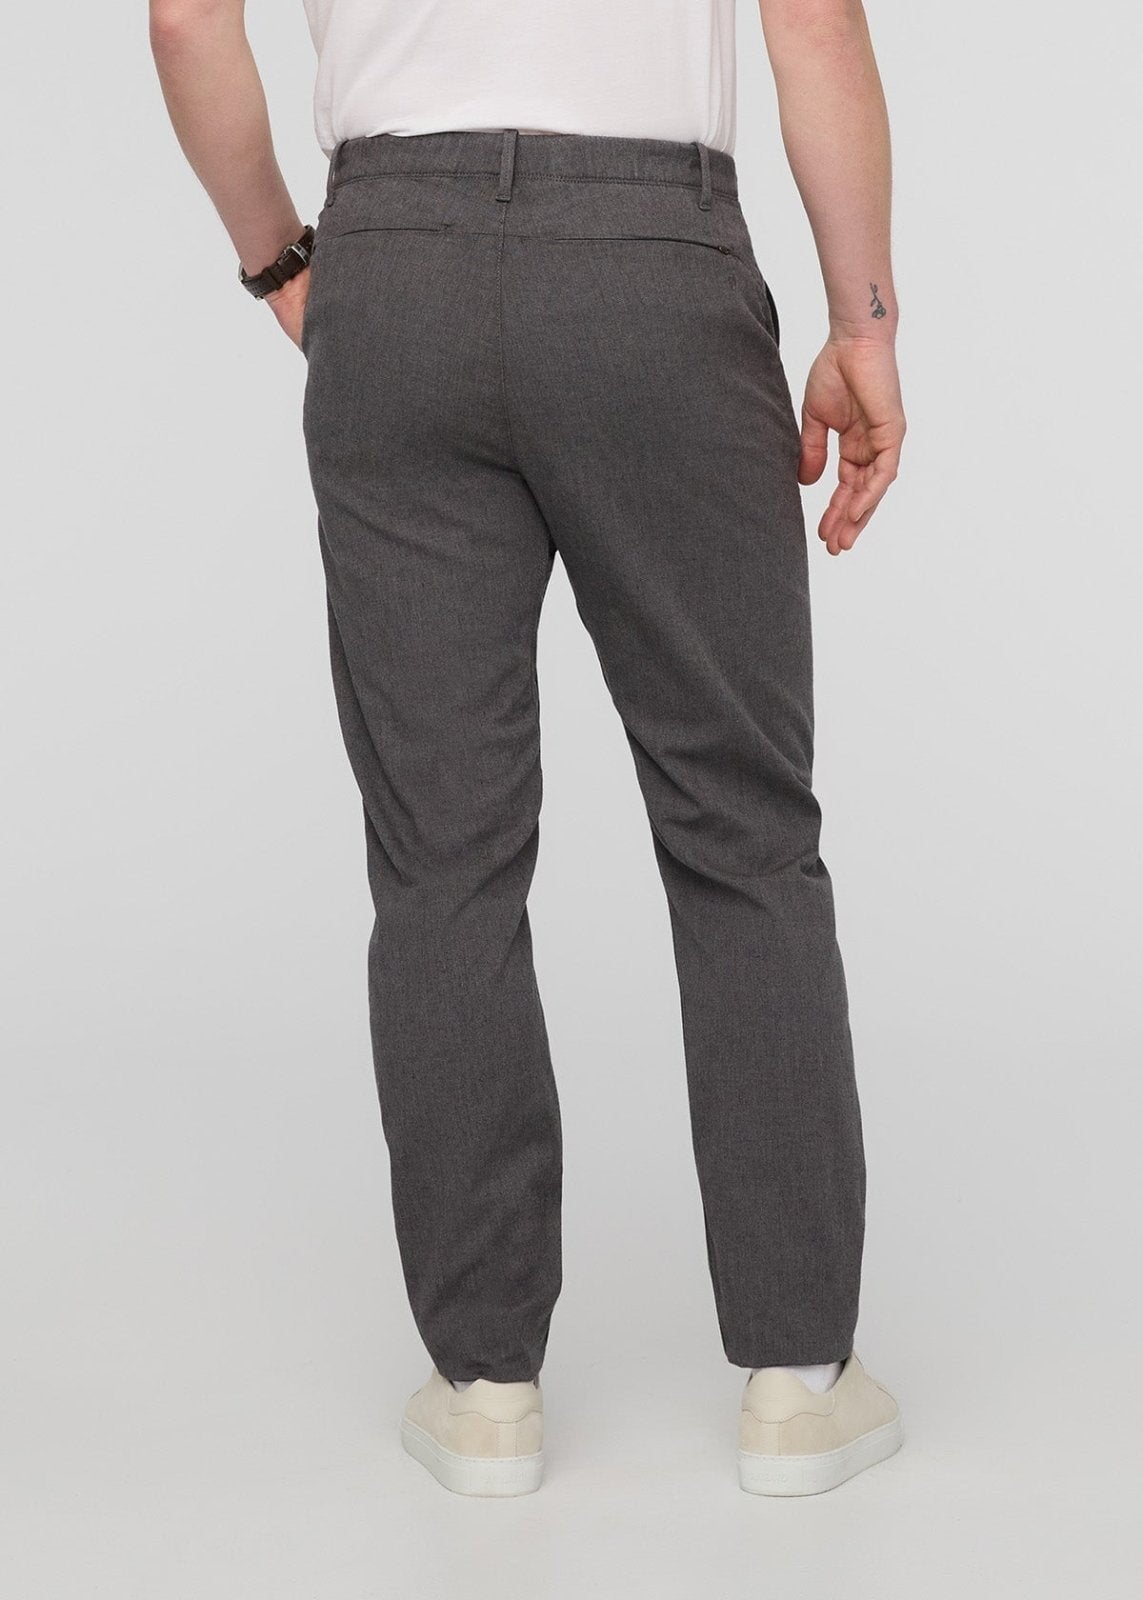 Buy Chino Pants For Men & Stretchable Chinos - Apella